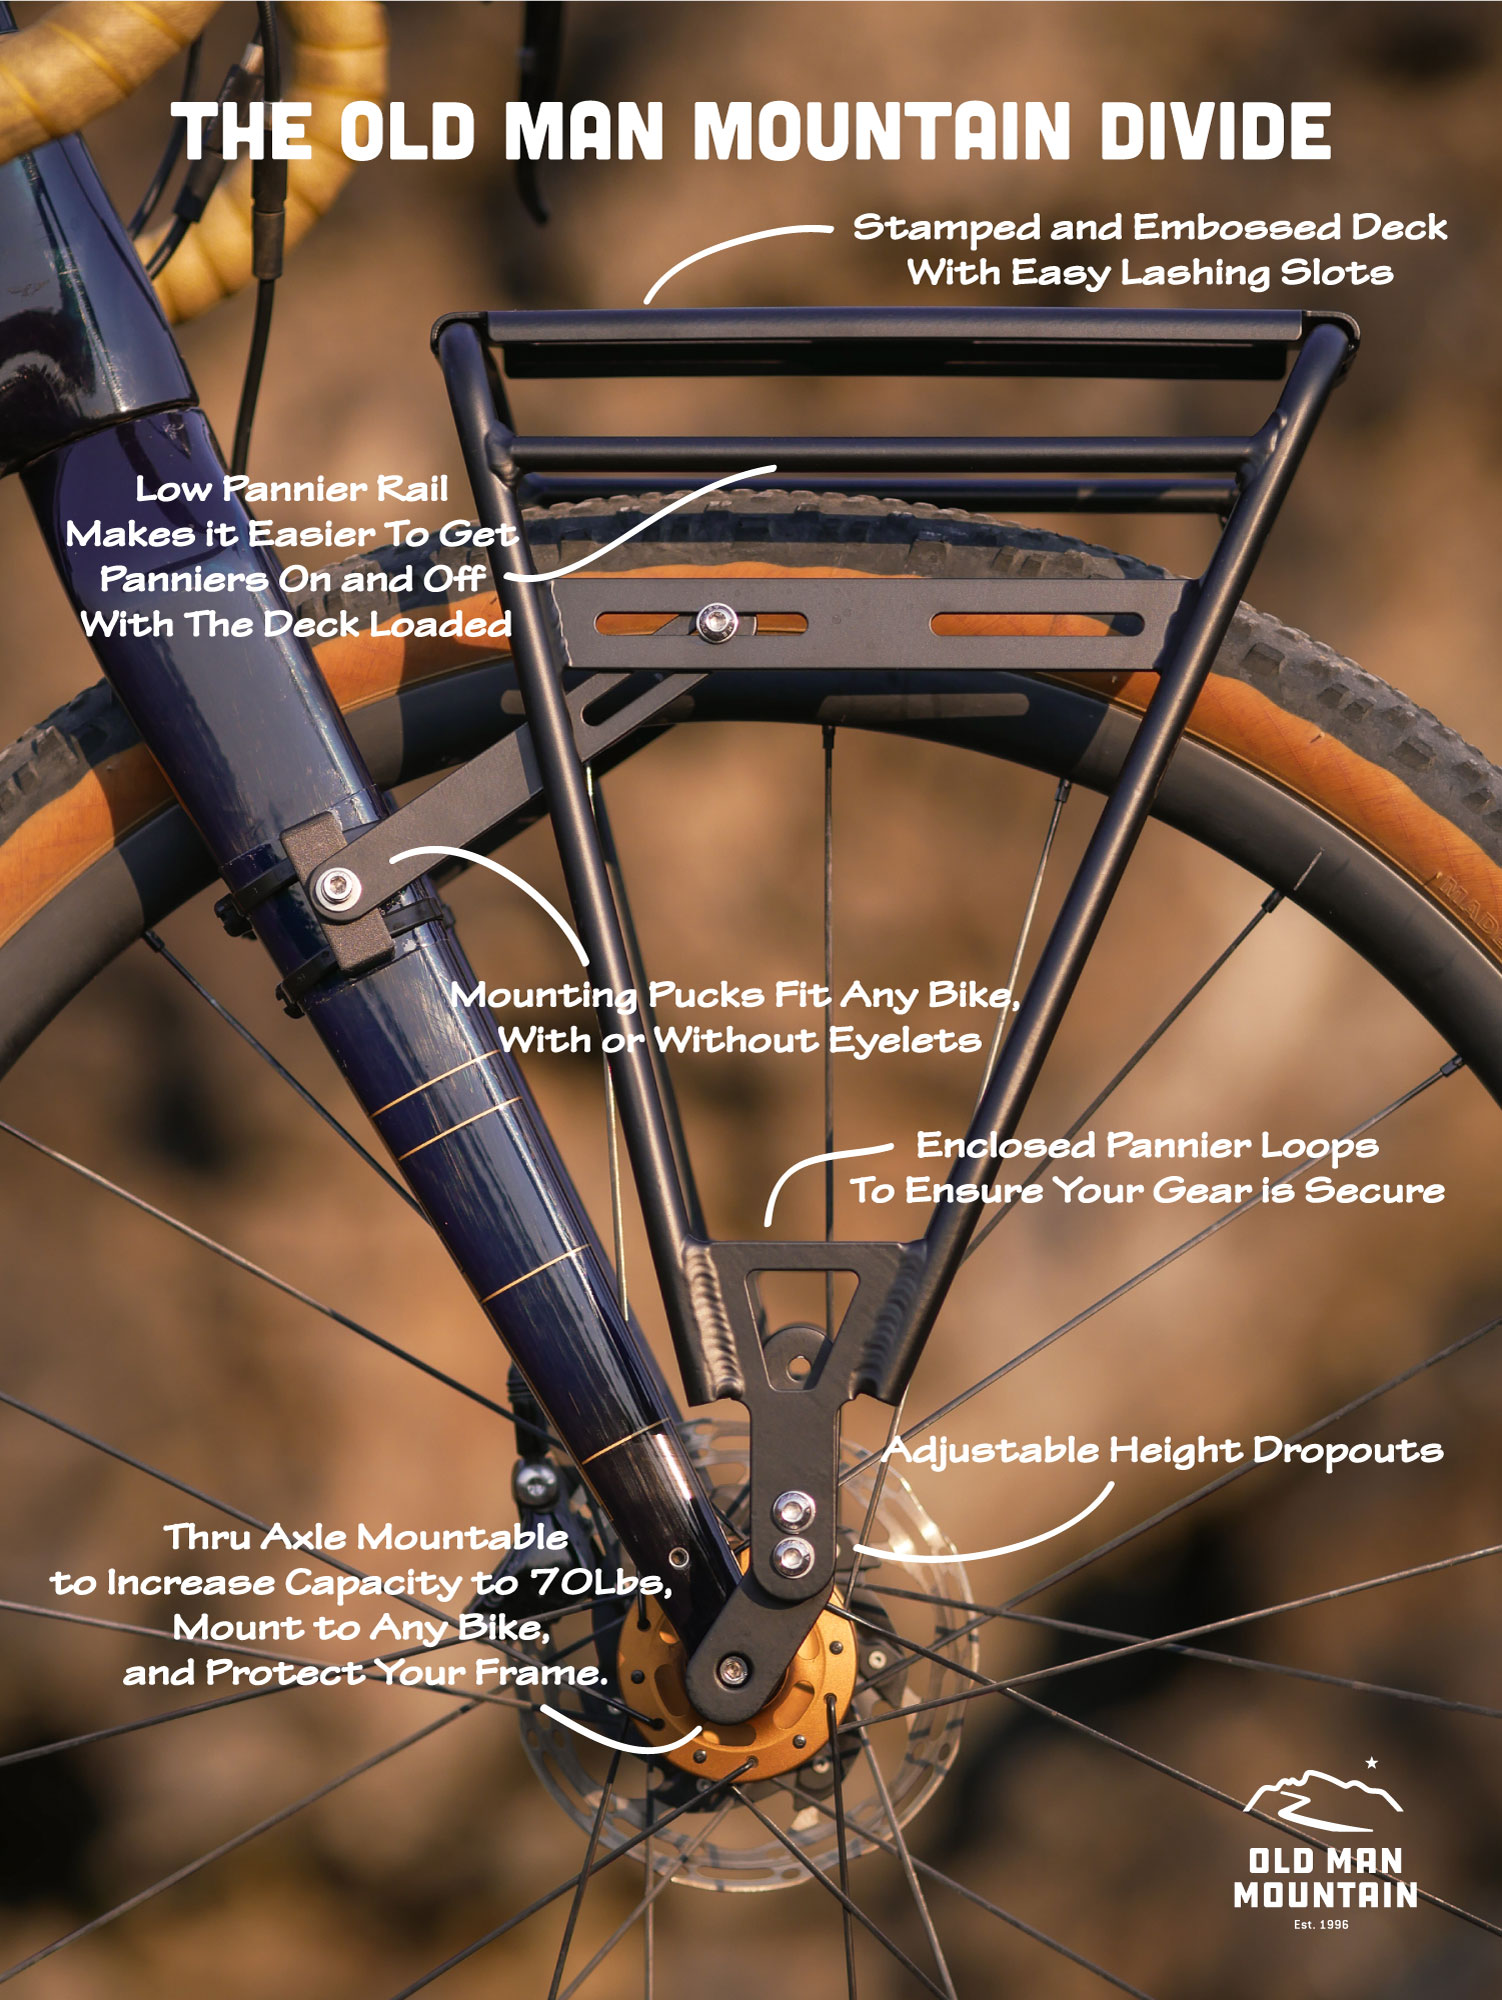 Isolator Luxe Biscuit Divide Bicycle Cargo Rack - Fits All Bikes Perfectly | Old Man Mountain